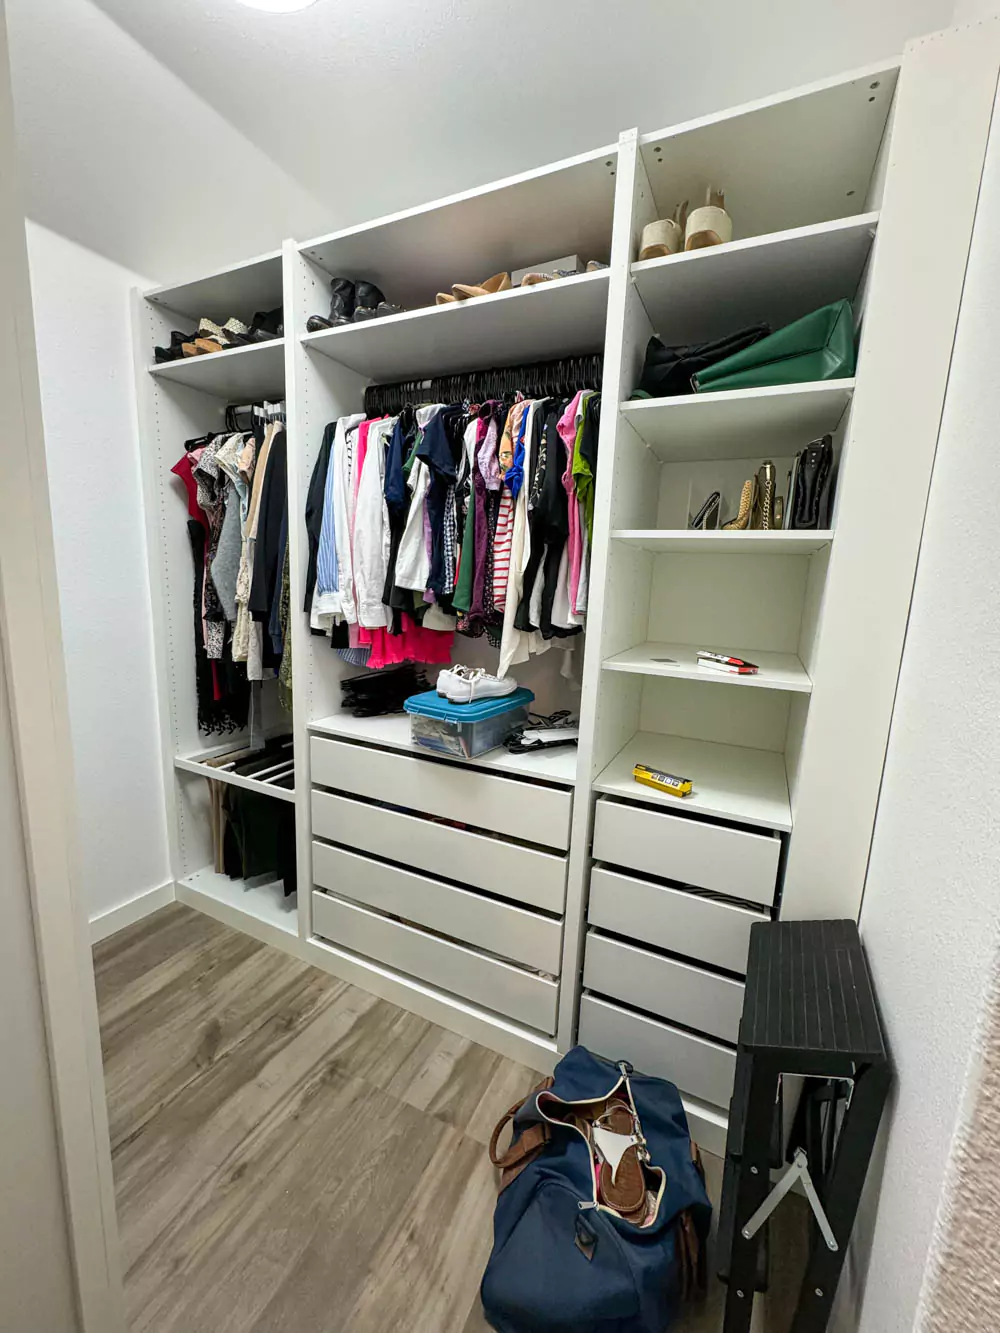 Our DIY Ikea PAX Built-in Closet Makeover Closed the Gap